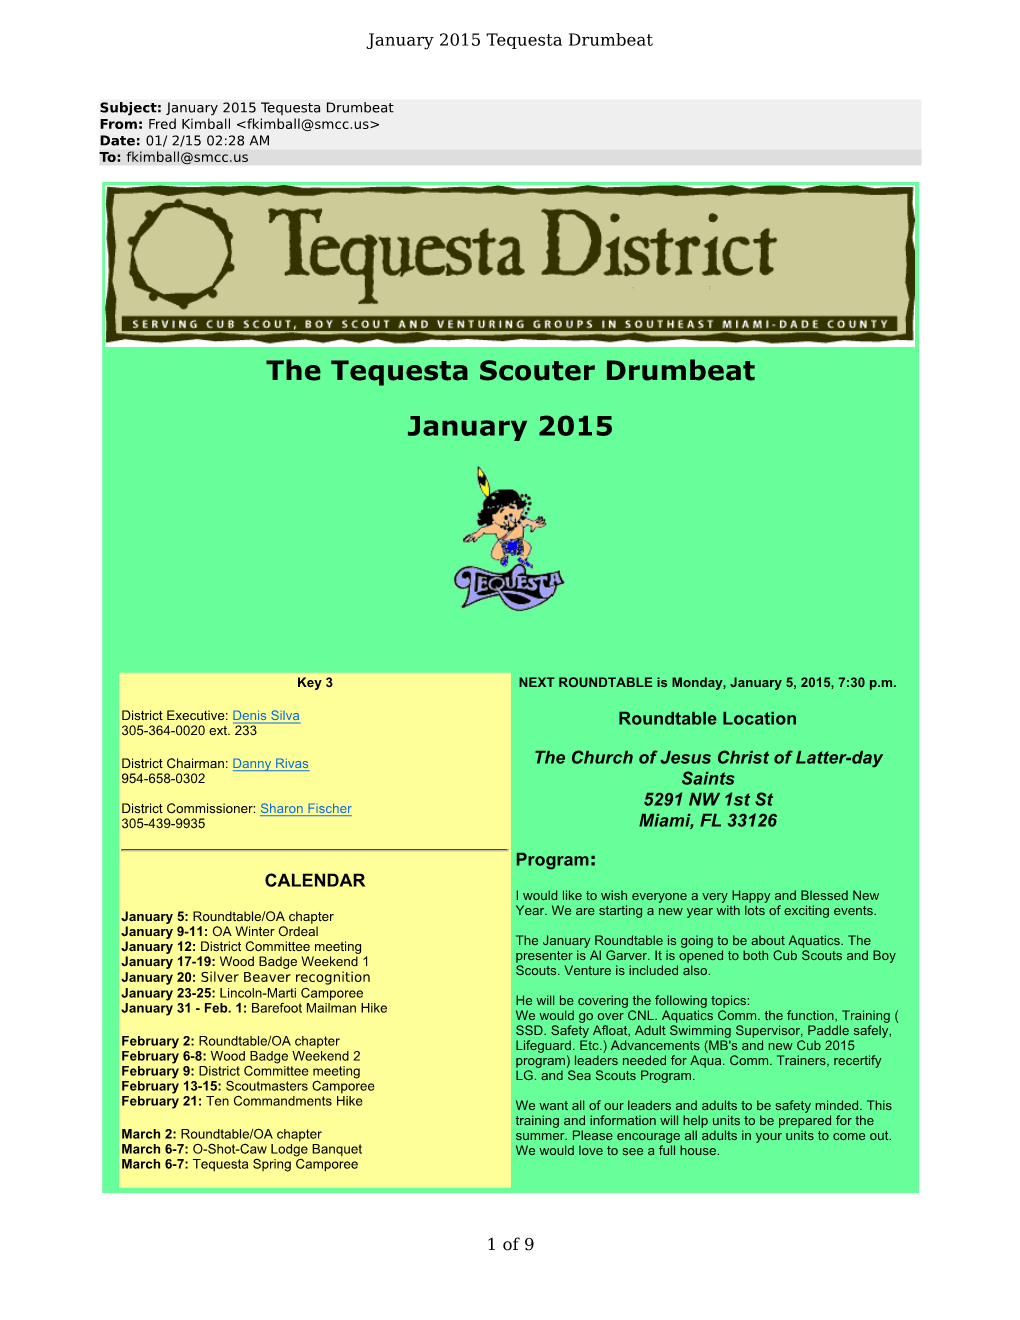 The Tequesta Scouter Drumbeat January 2015